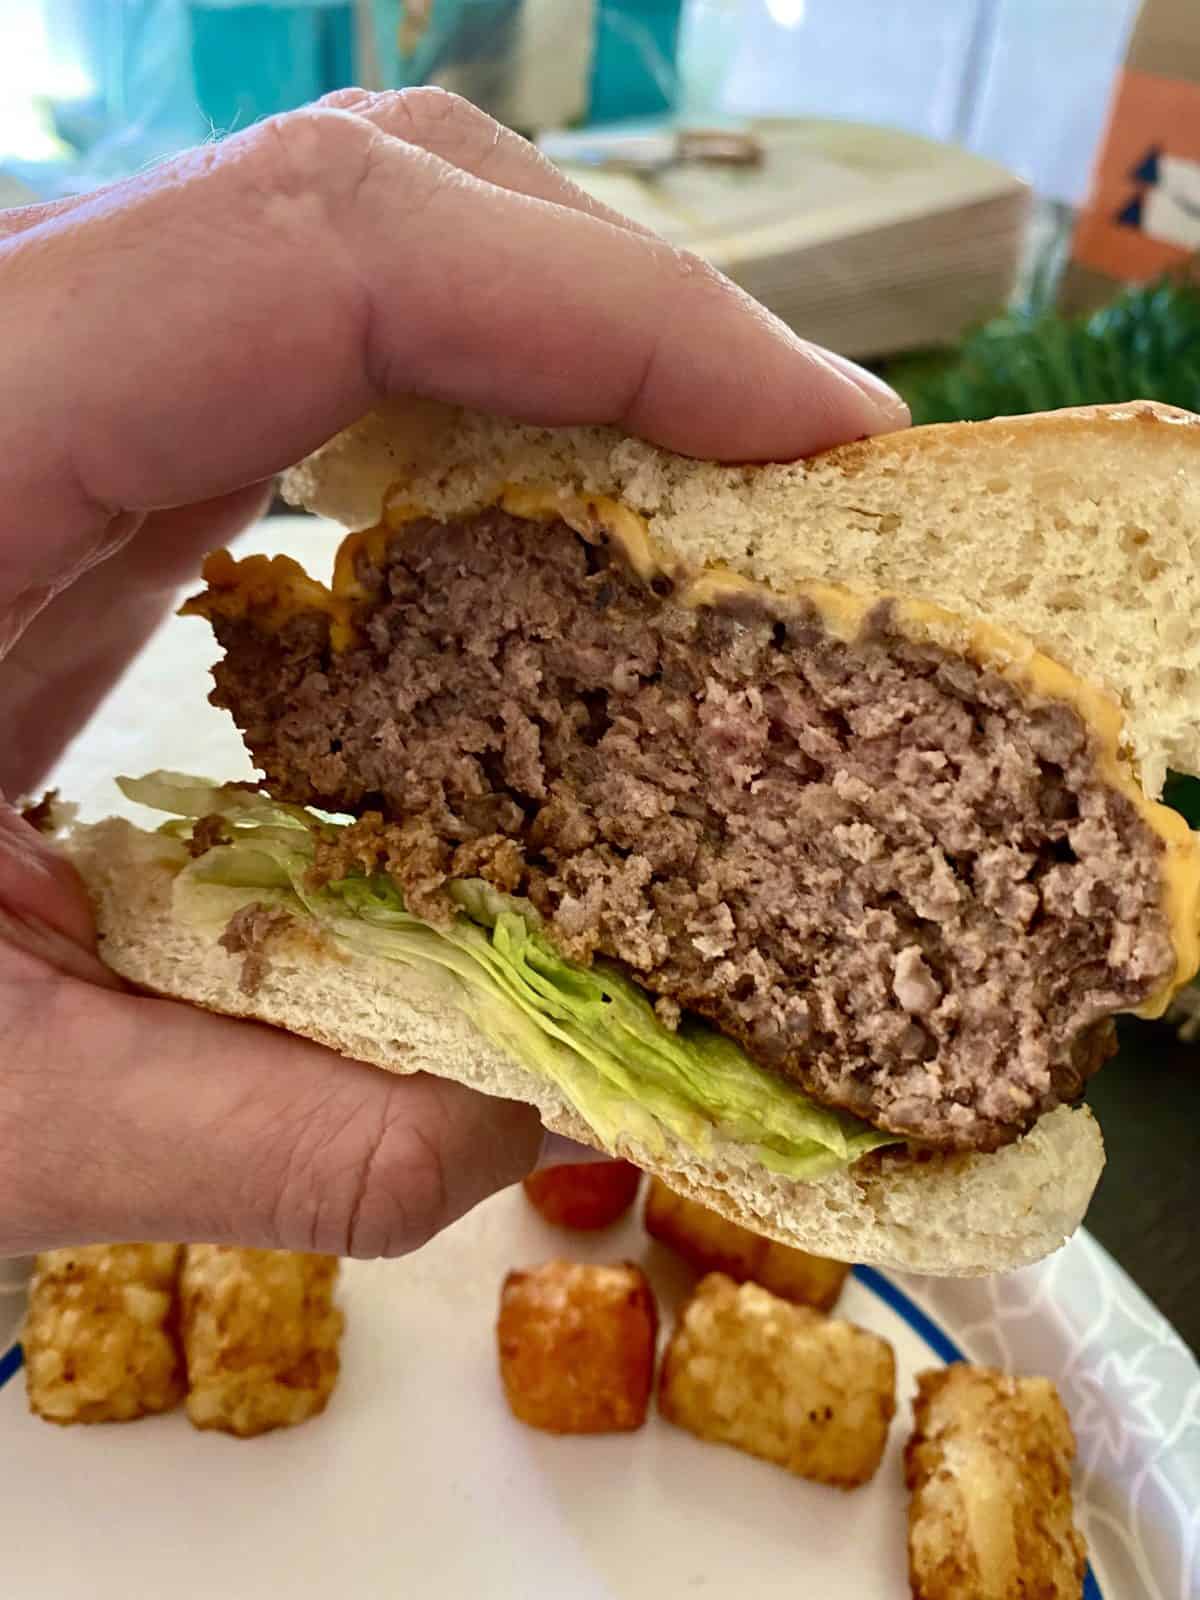 https://laughingspatula.com/wp-content/uploads/2021/12/holding-medium-well-burger-with-tater-tots-in-background-scaled.jpeg